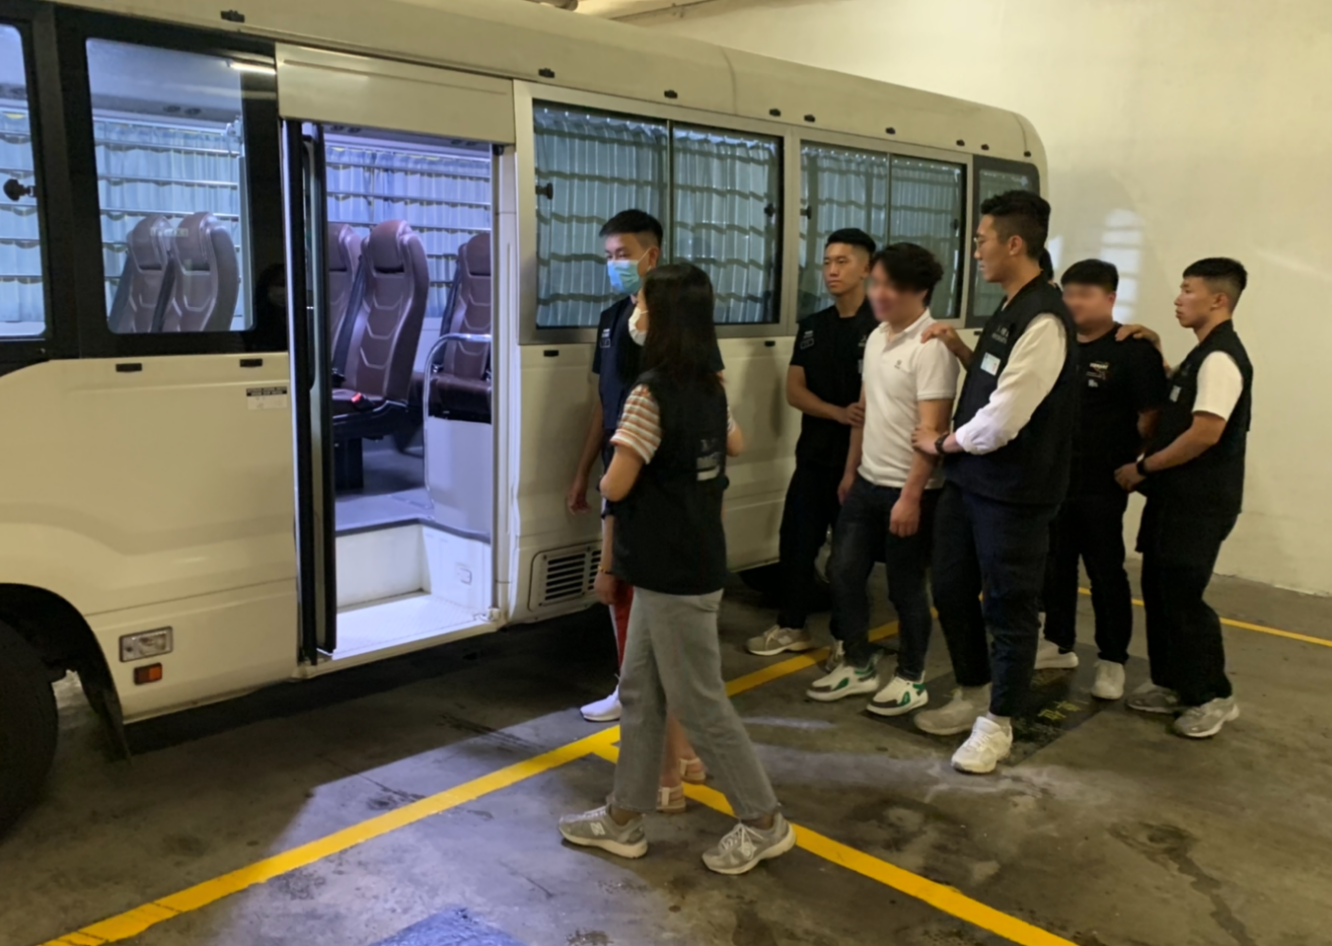 The Immigration Department mounted a series of territory-wide anti-illegal worker operations codenamed "Fastrack", "Lightshadow" and "Twilight" and joint operations with the Hong Kong Police Force codenamed "Champion" and "Windsand" for four consecutive days from May 29 to yesterday (June 1). Photo shows suspected illegal workers arrested during an operation.